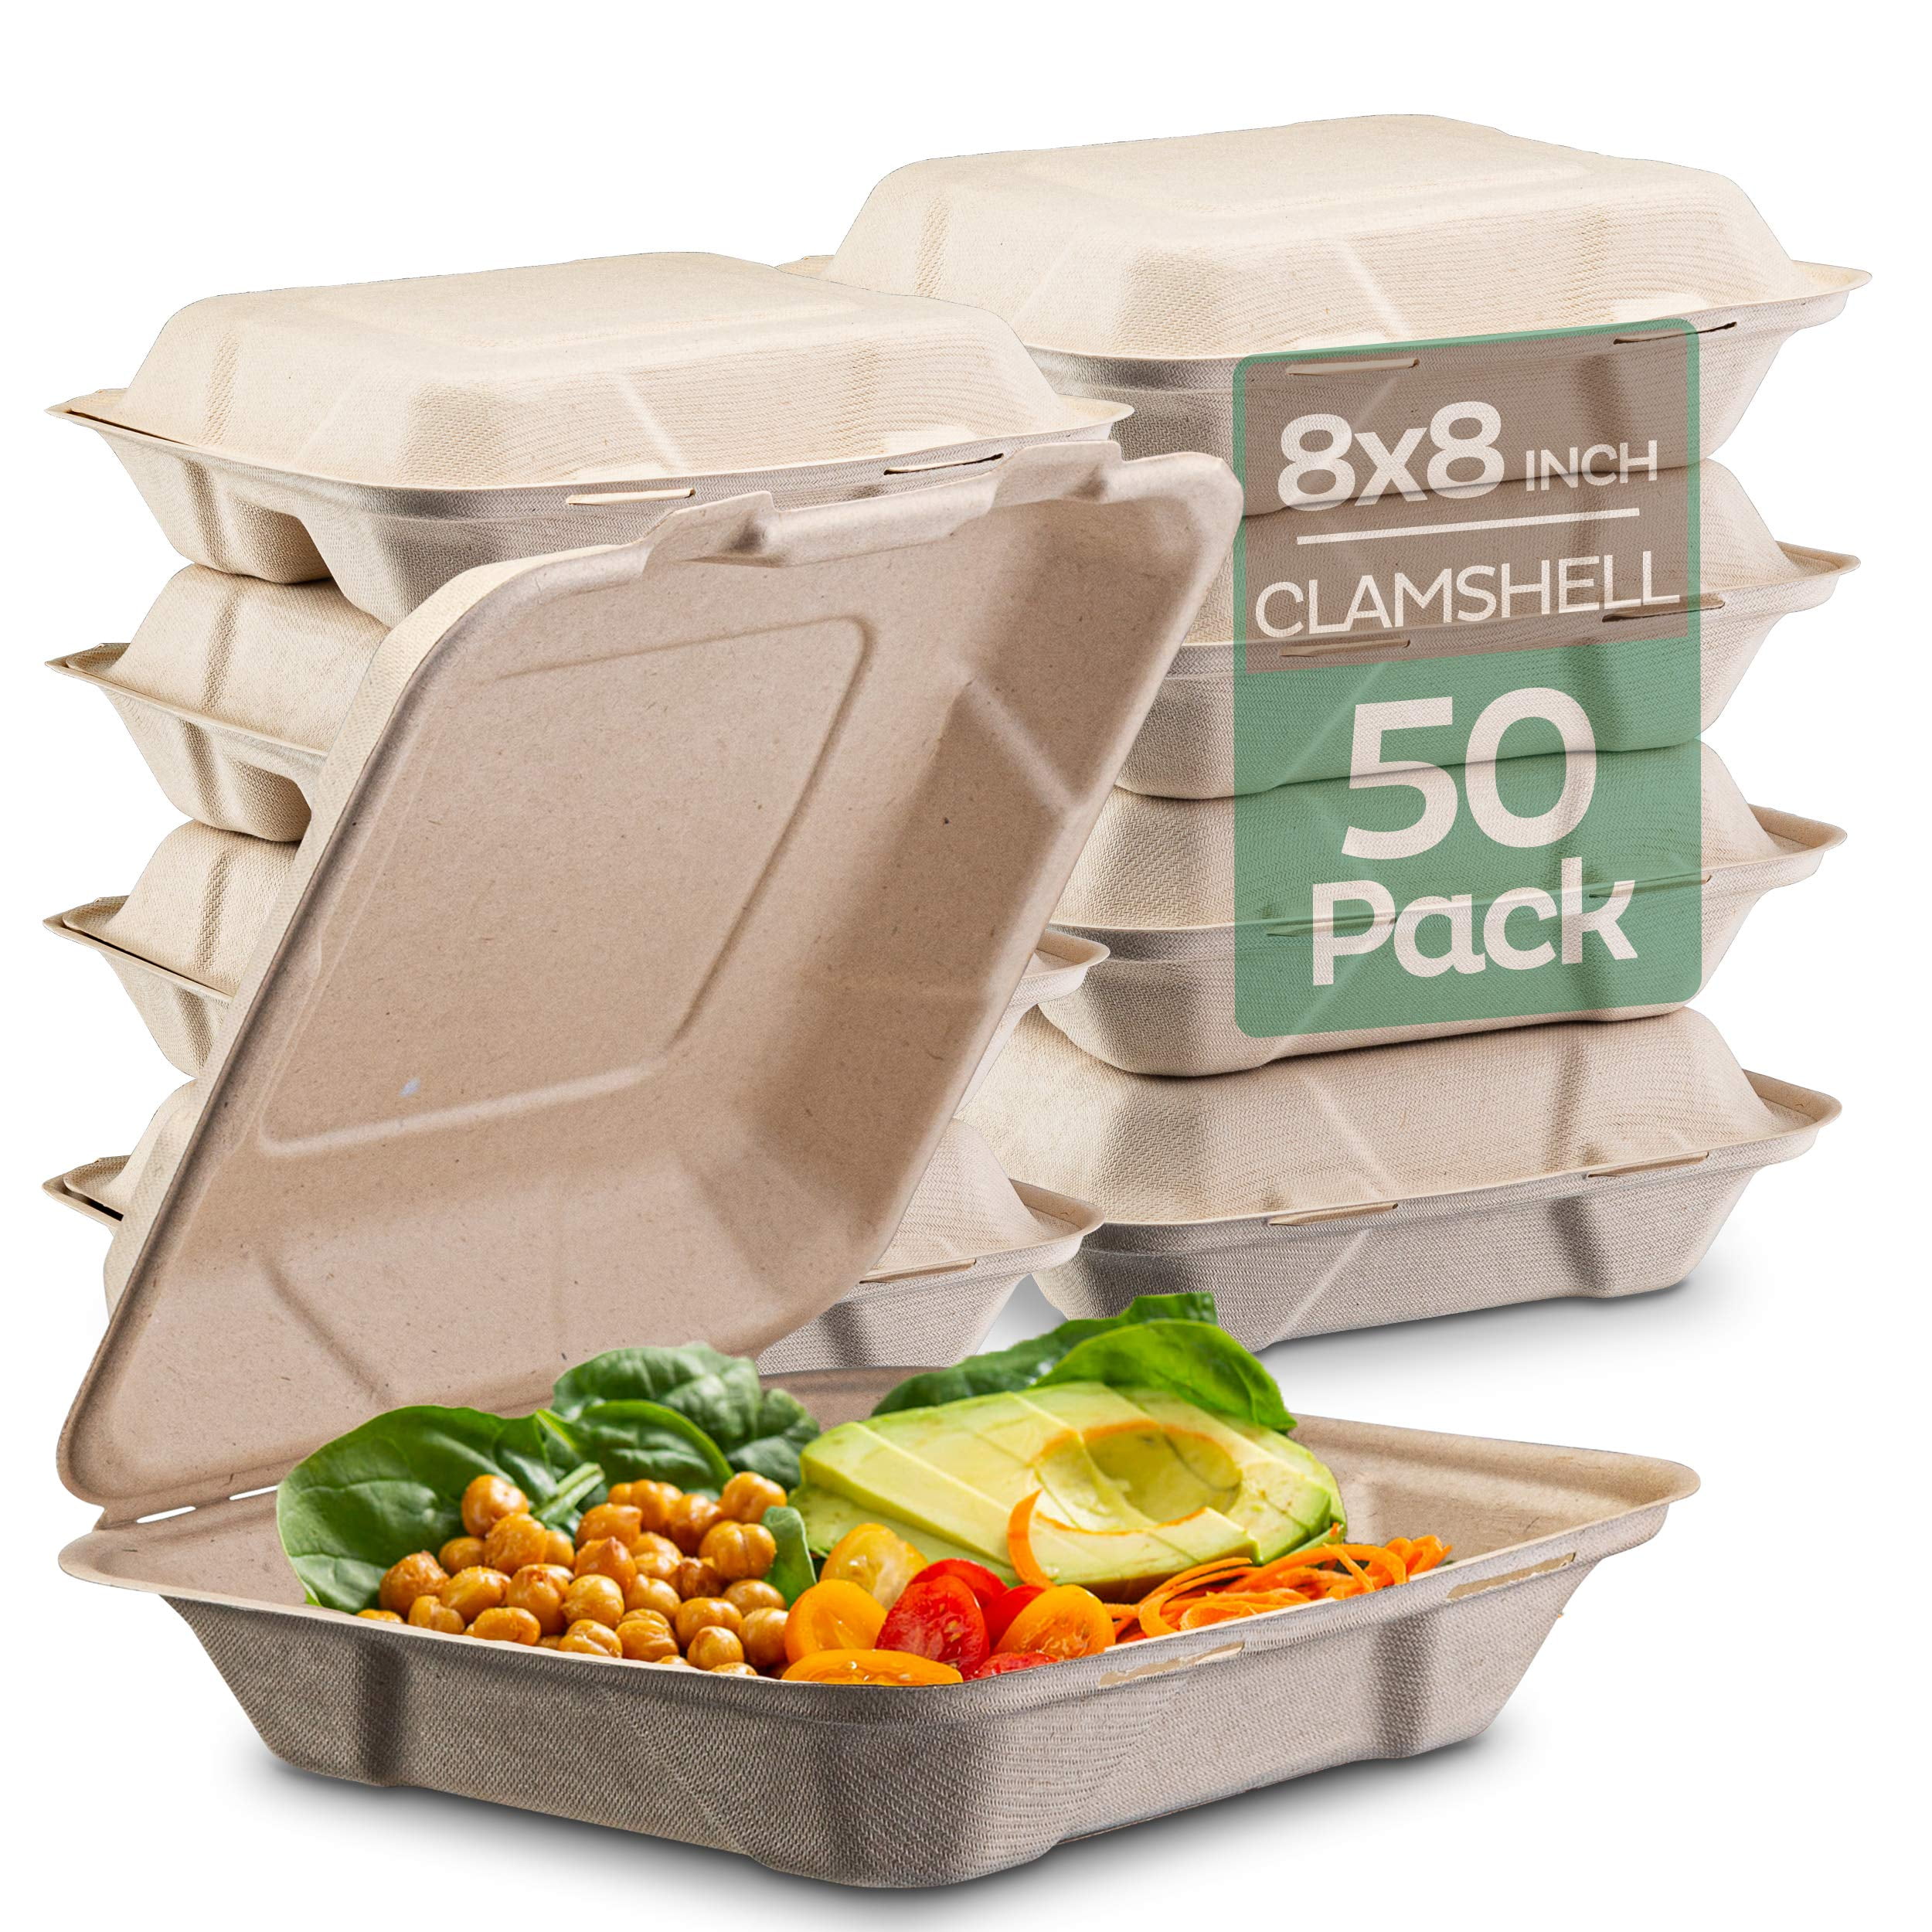 Go Food 50-Pack Clamshell Take Out Food Containers 6x6" Heavy-Duty Quality To 